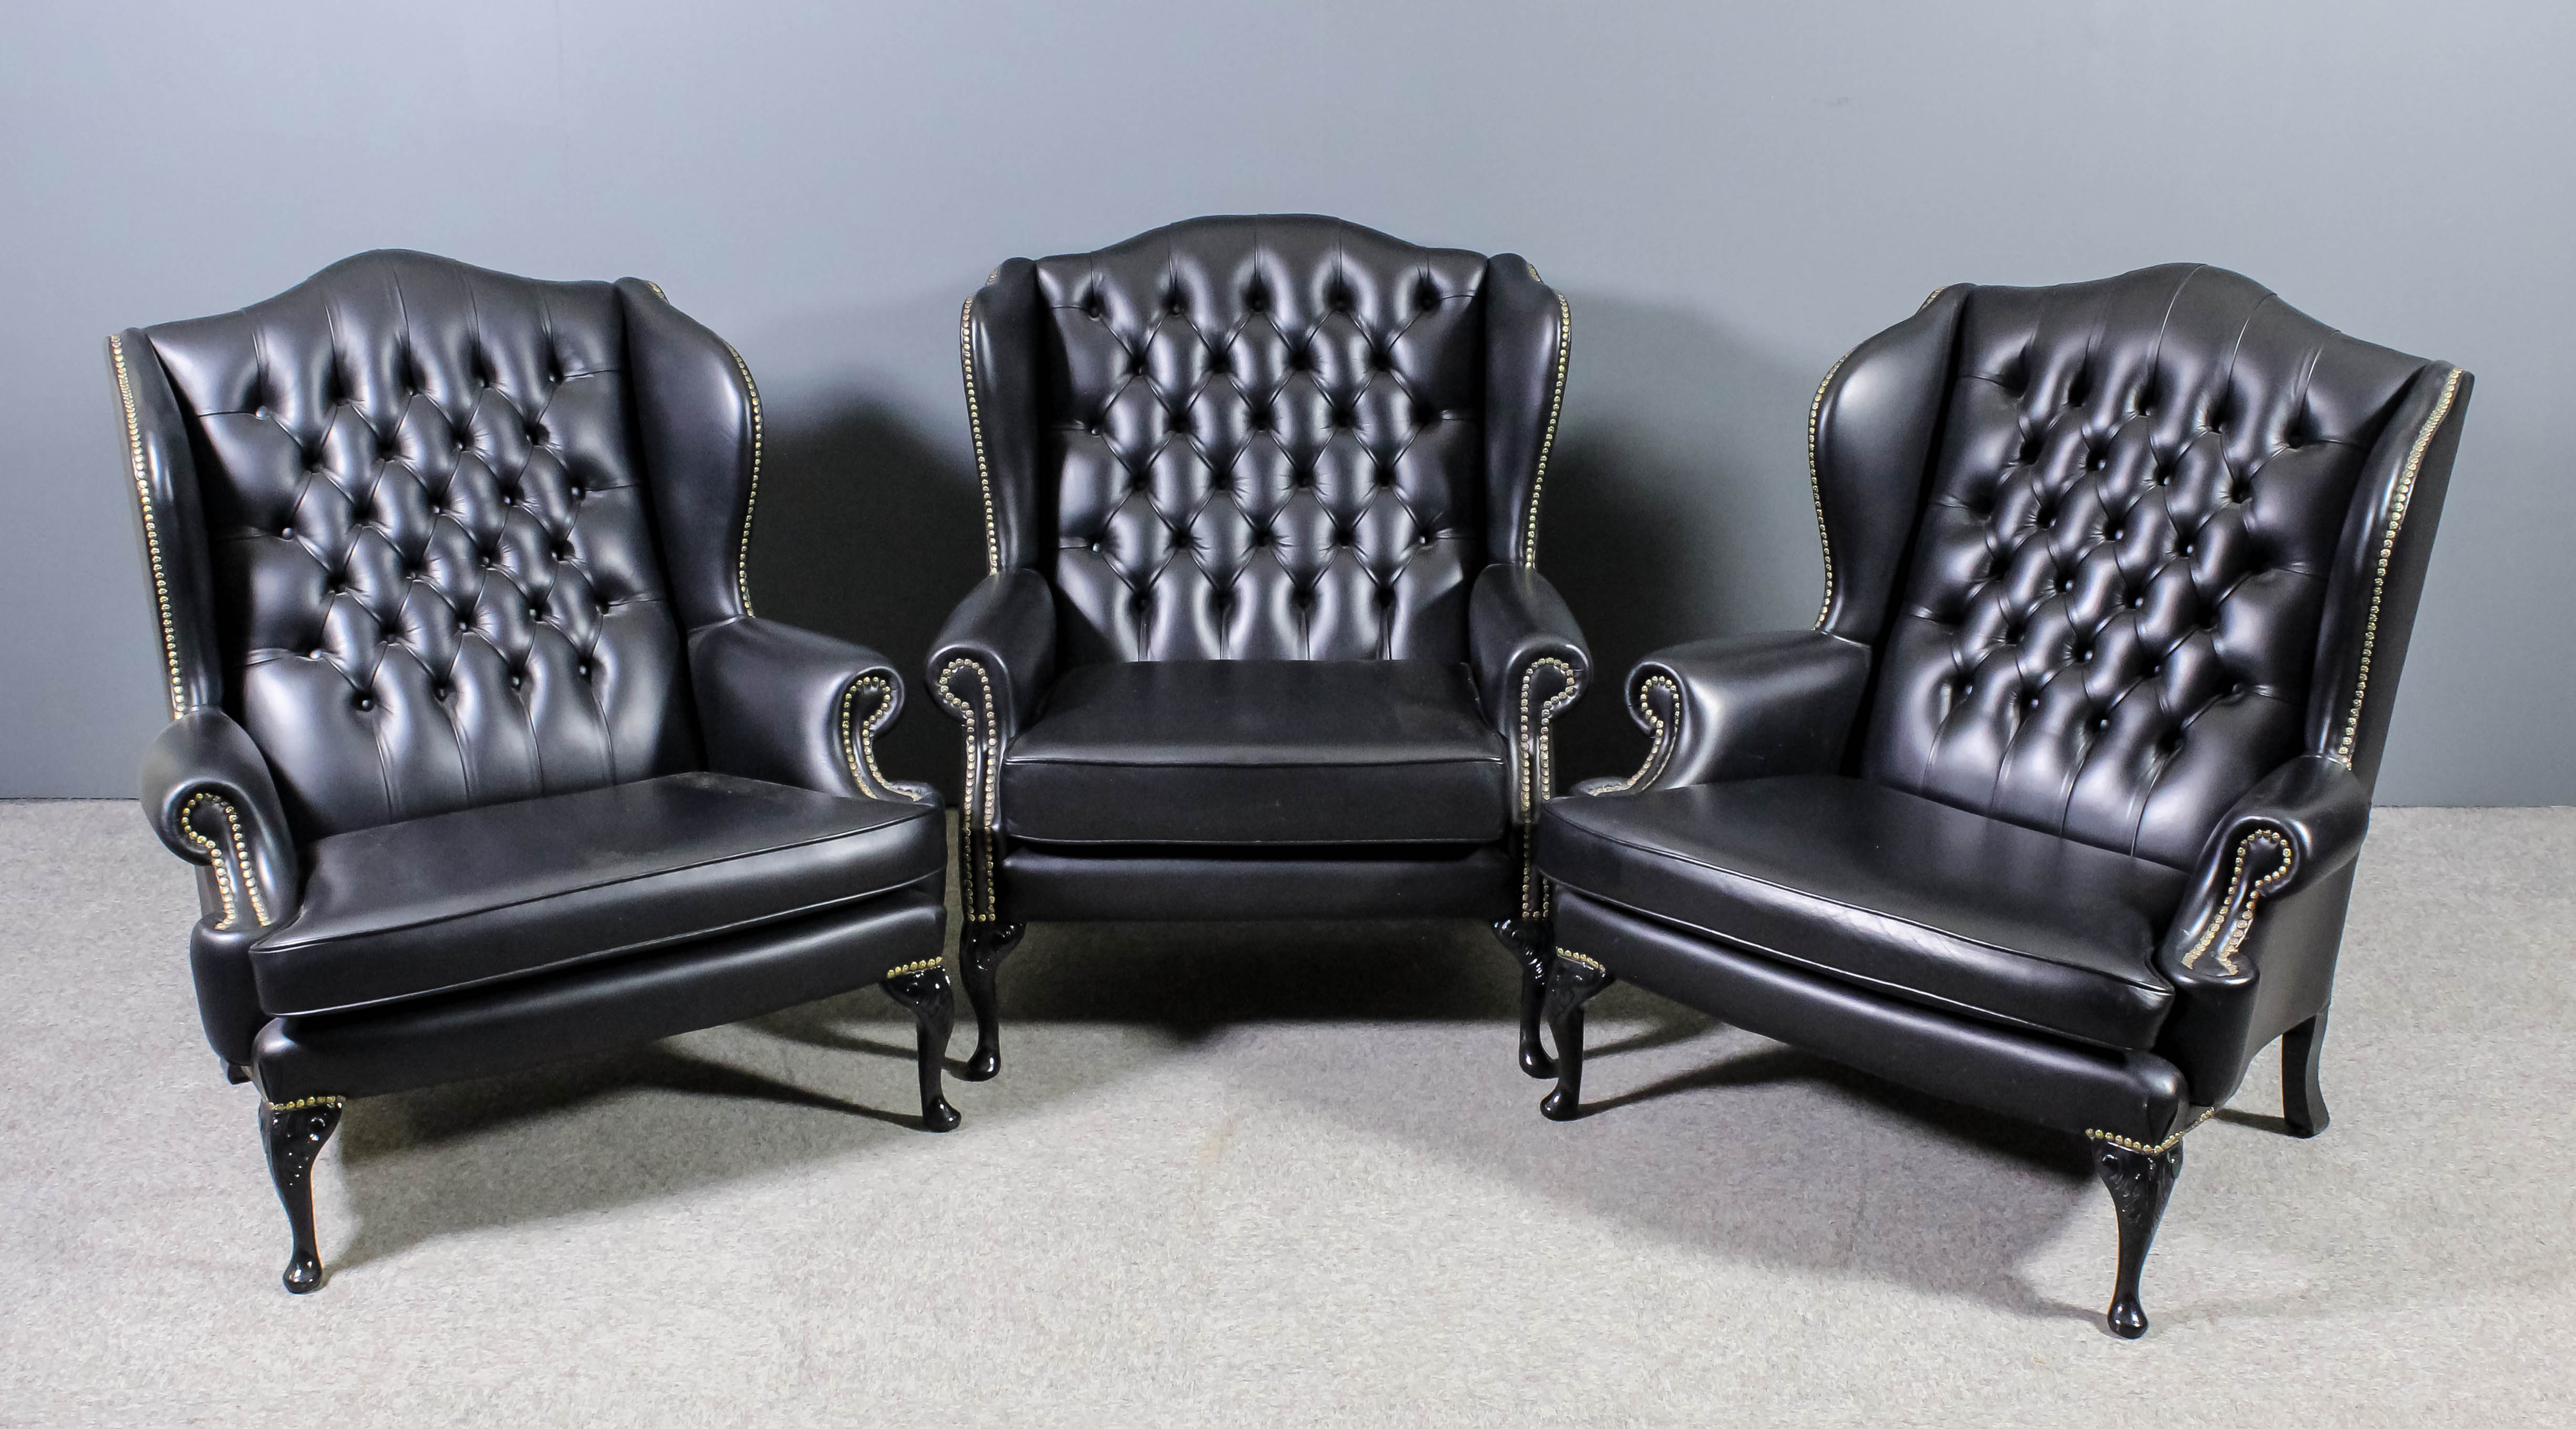 A pair of modern wing back easy chairs of large proportions and of "18th Century" design, with